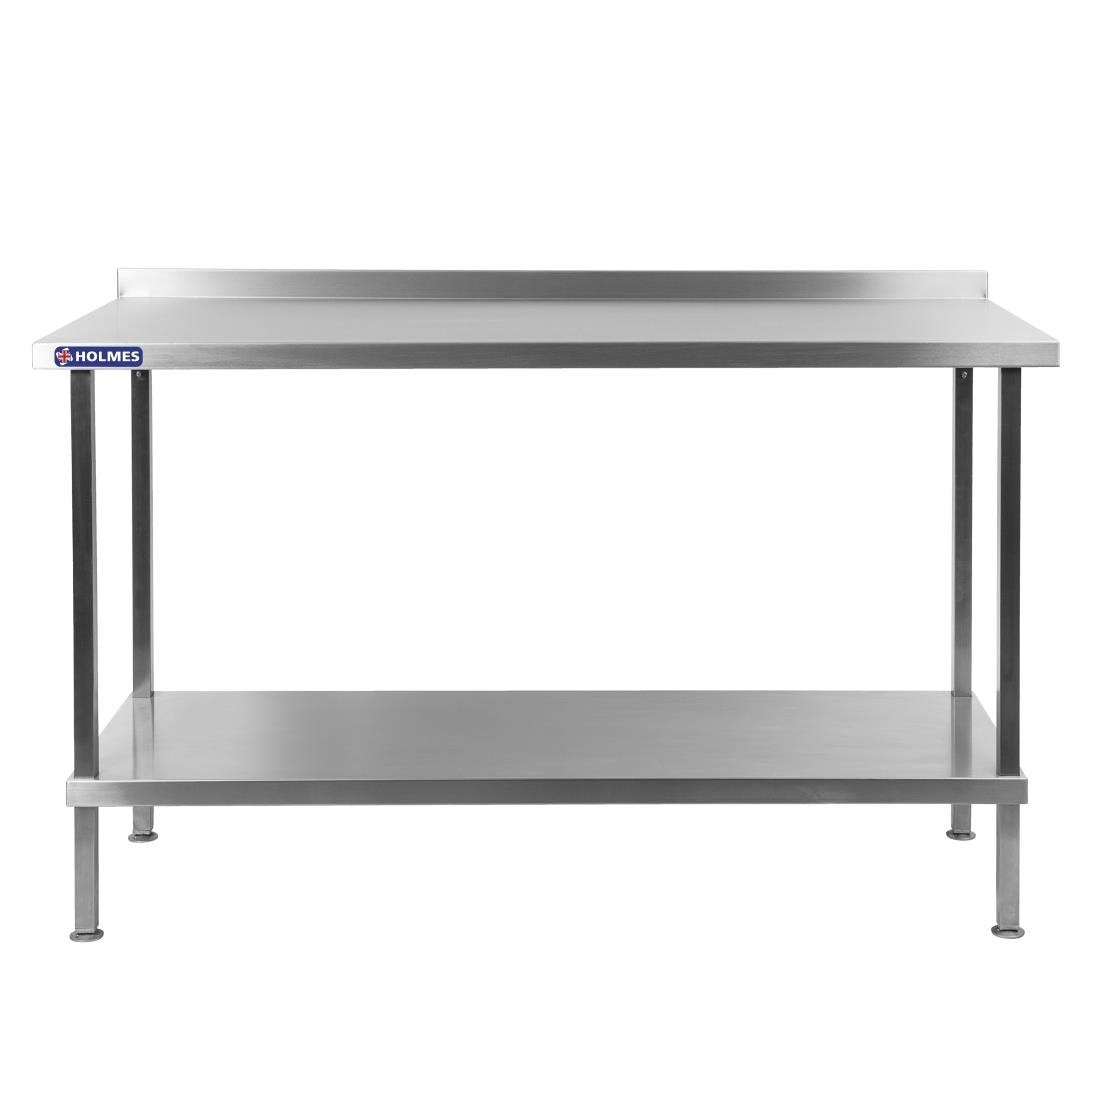 DR023 Holmes Stainless Steel Wall Table with Upstand 1500mm JD Catering Equipment Solutions Ltd